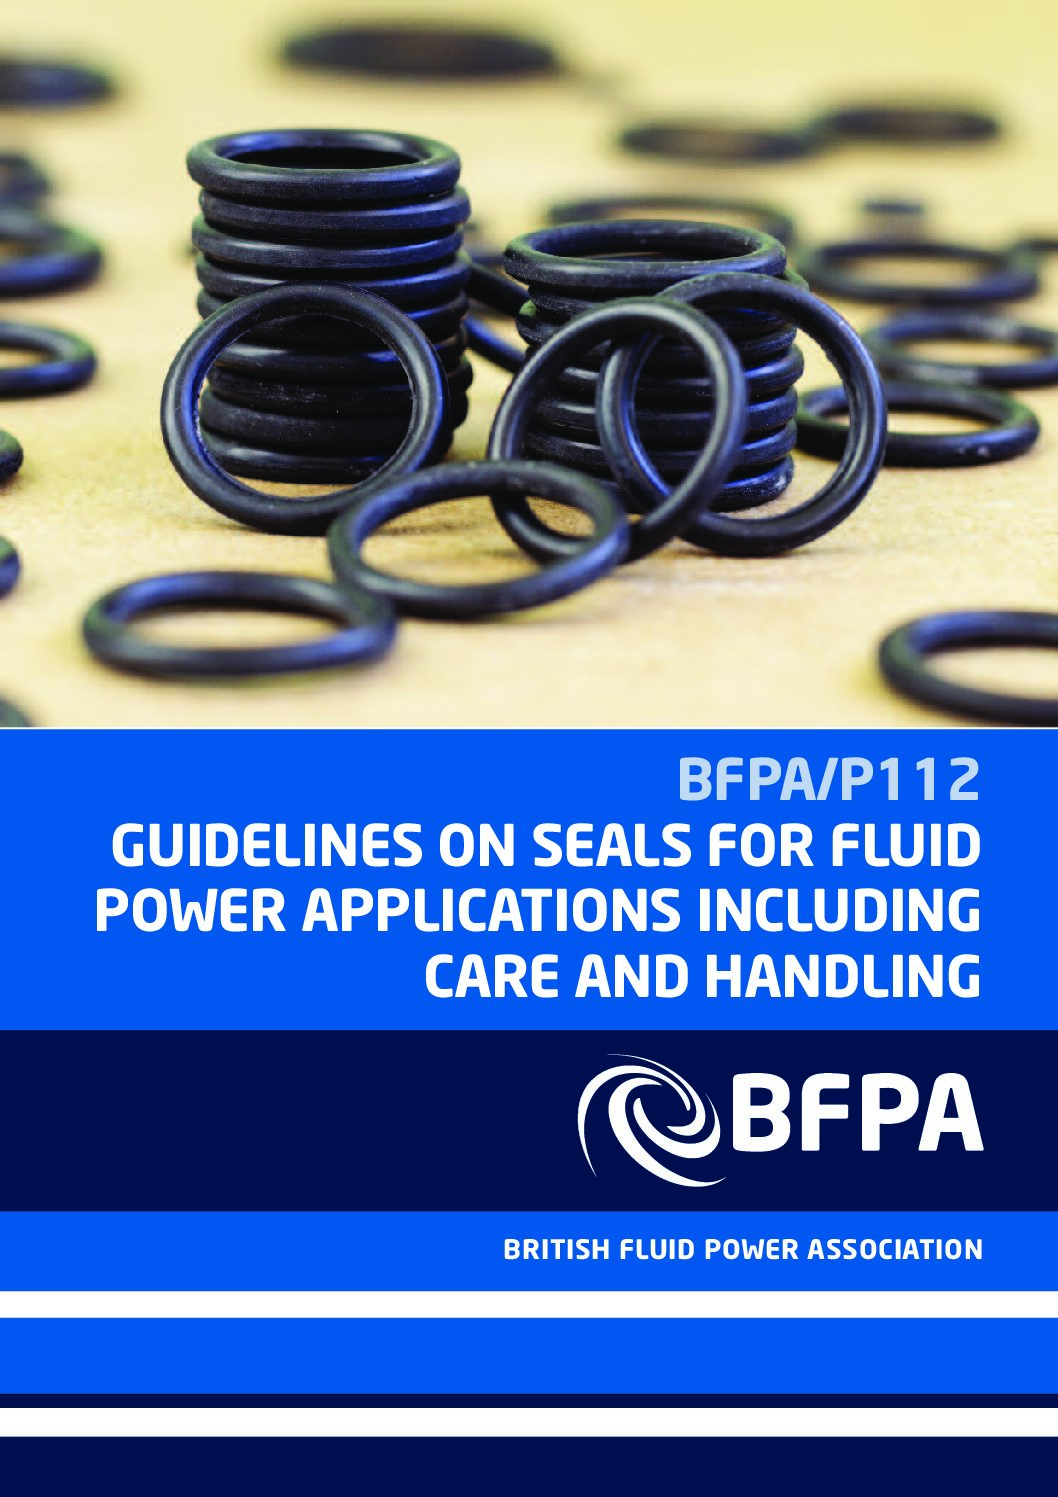 Guidelines on seals for fluid power applications including care and handling